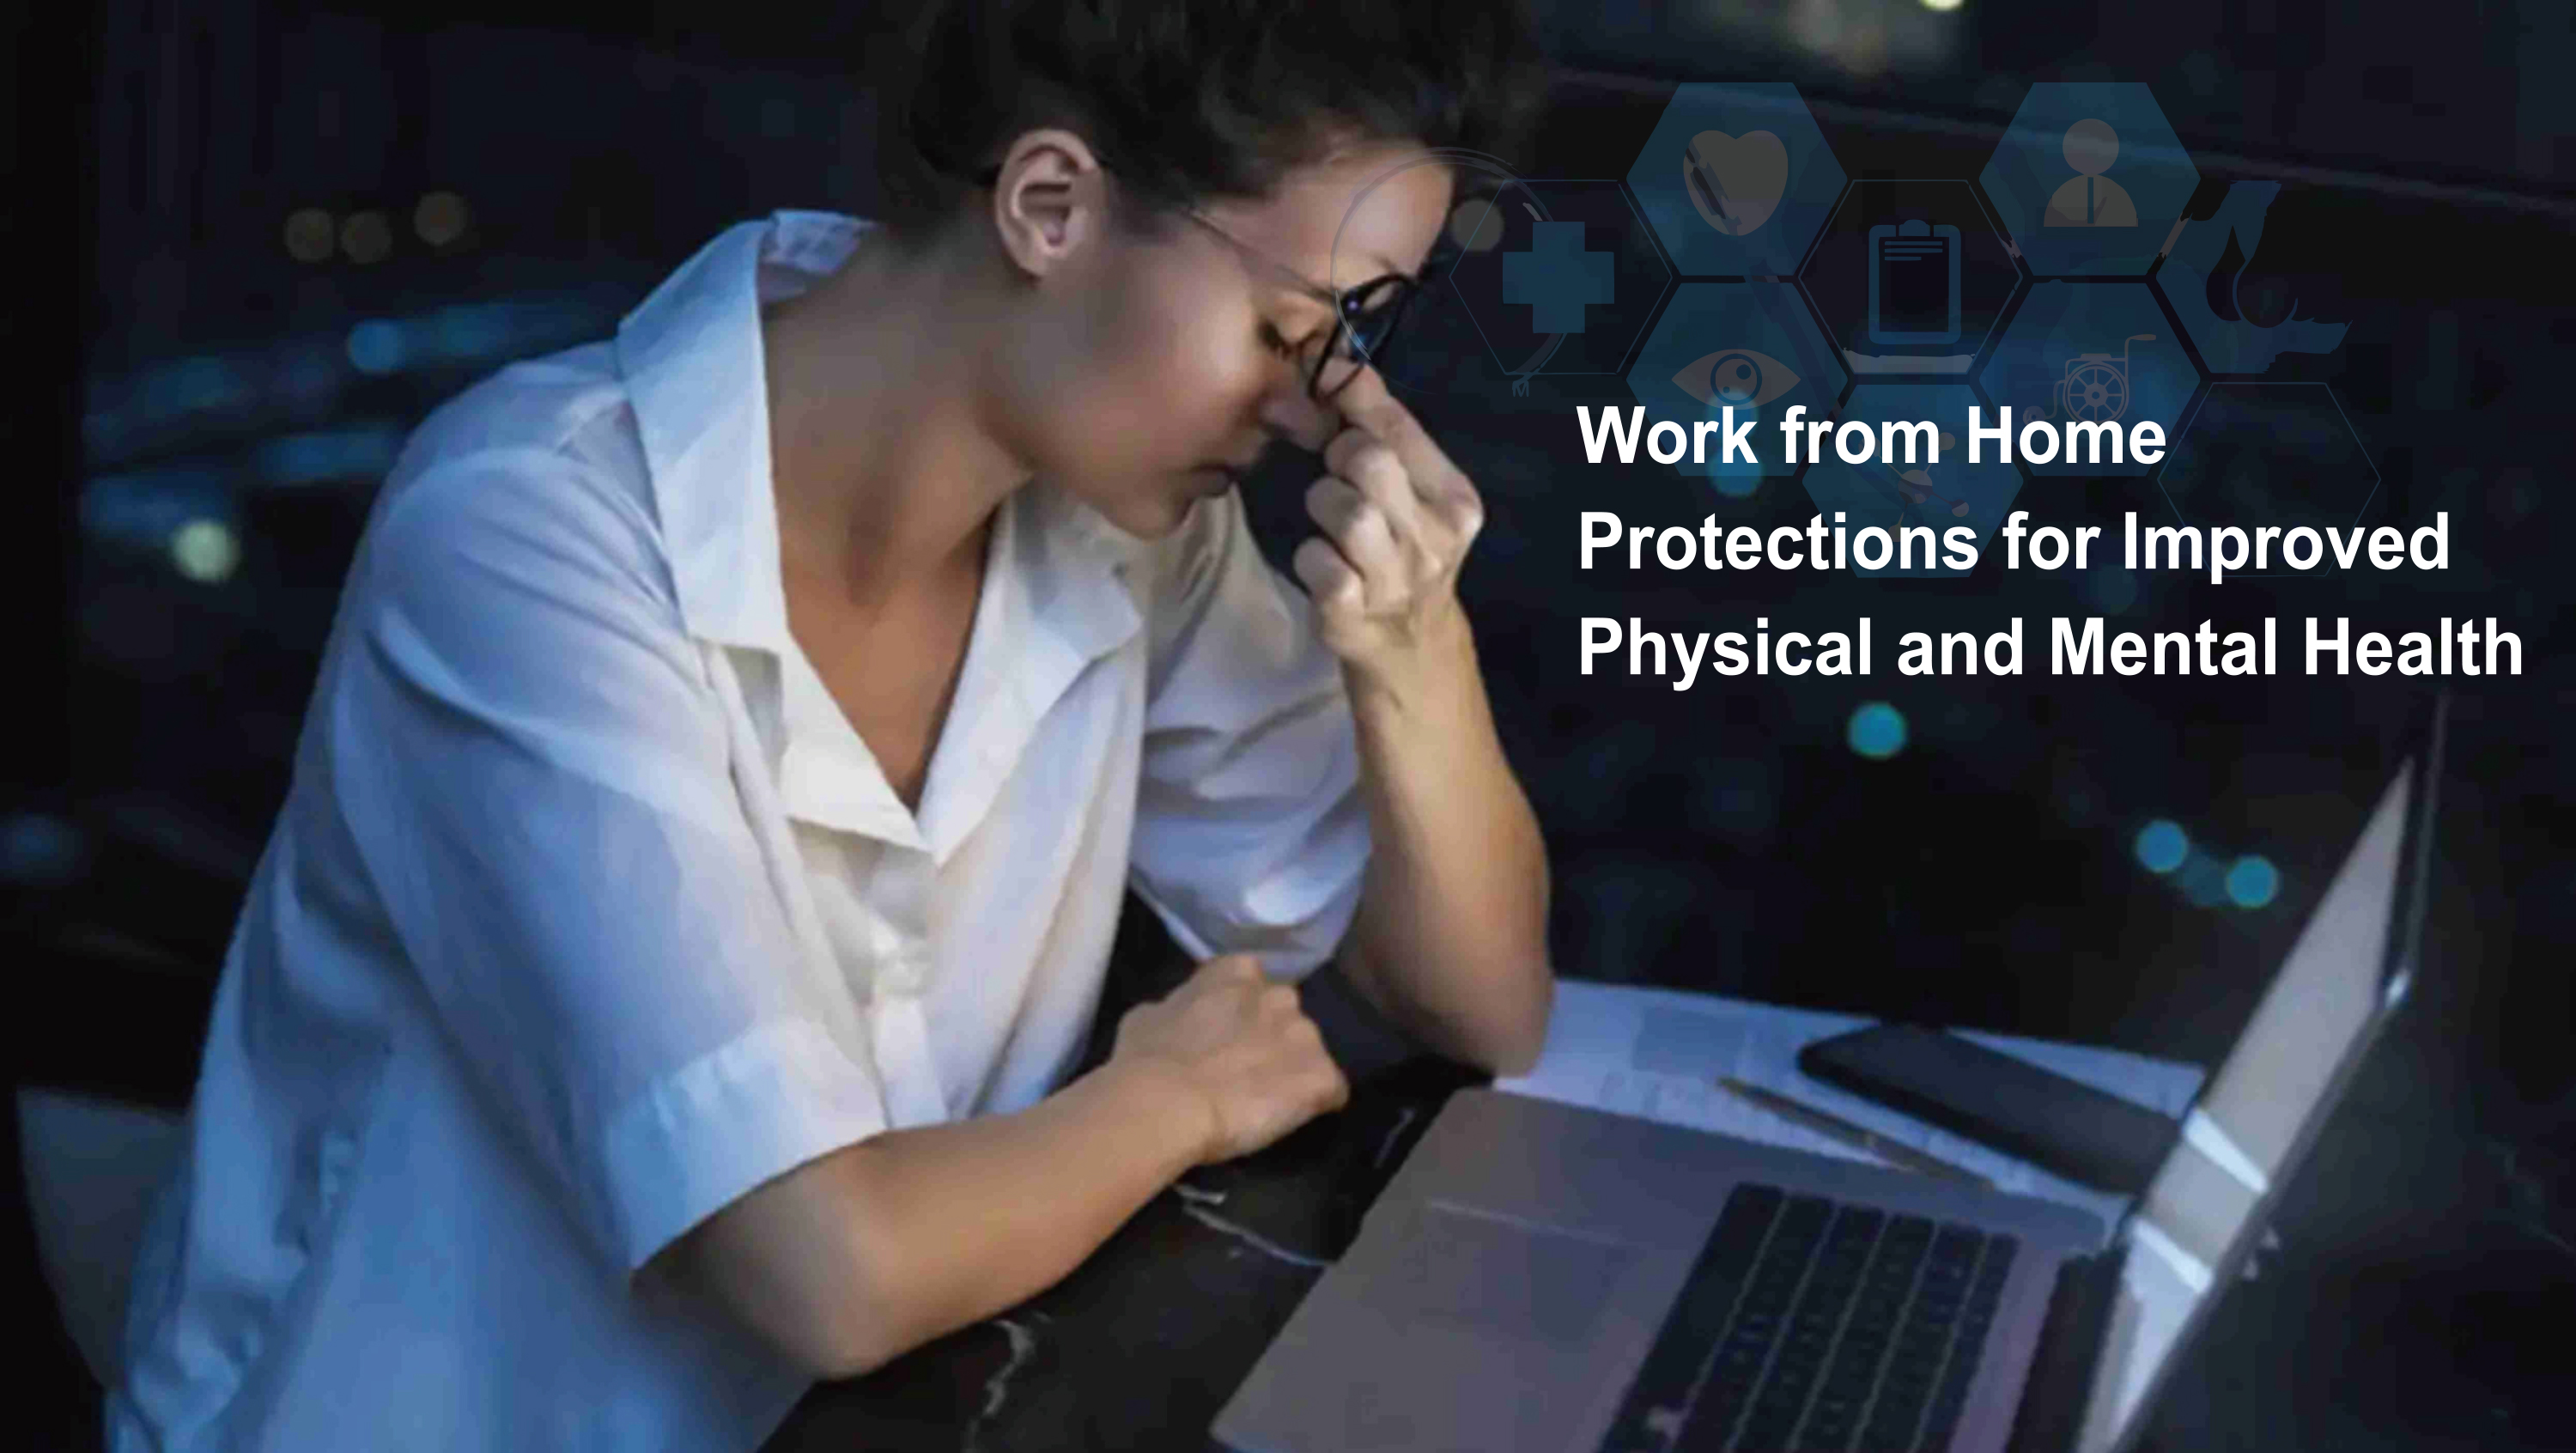 Work from Home Protections for Improved Physical and Mental Health